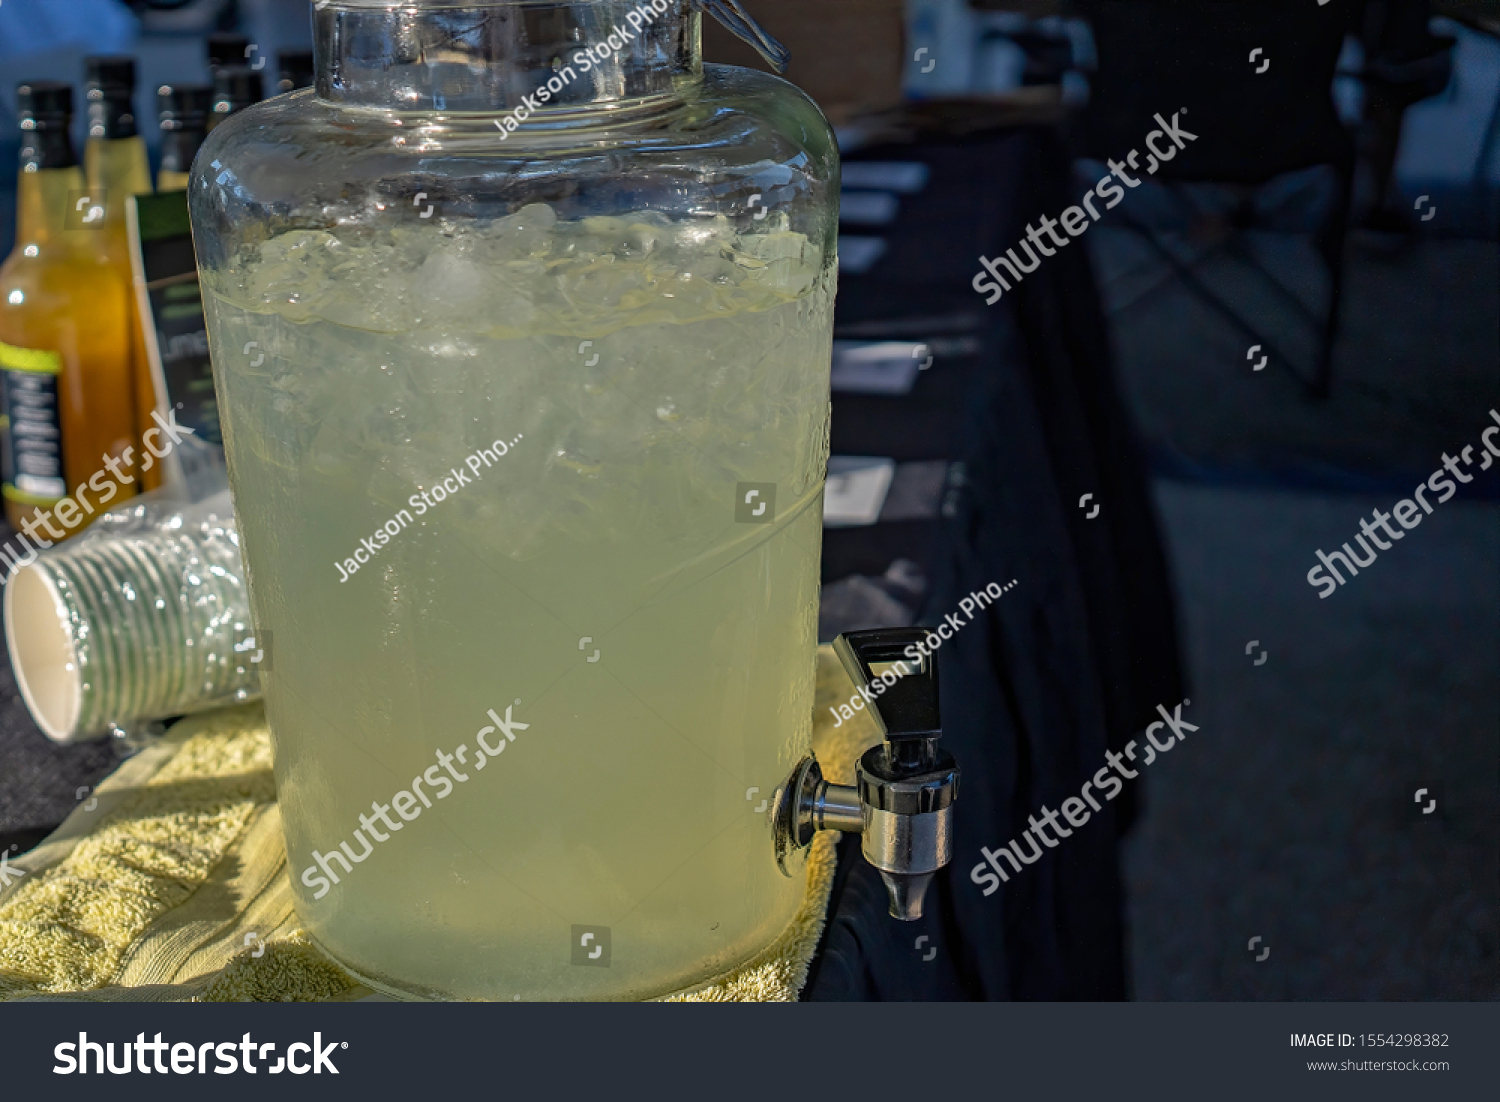 Cold refreshing lemonade for sale at a market stall #1554298382